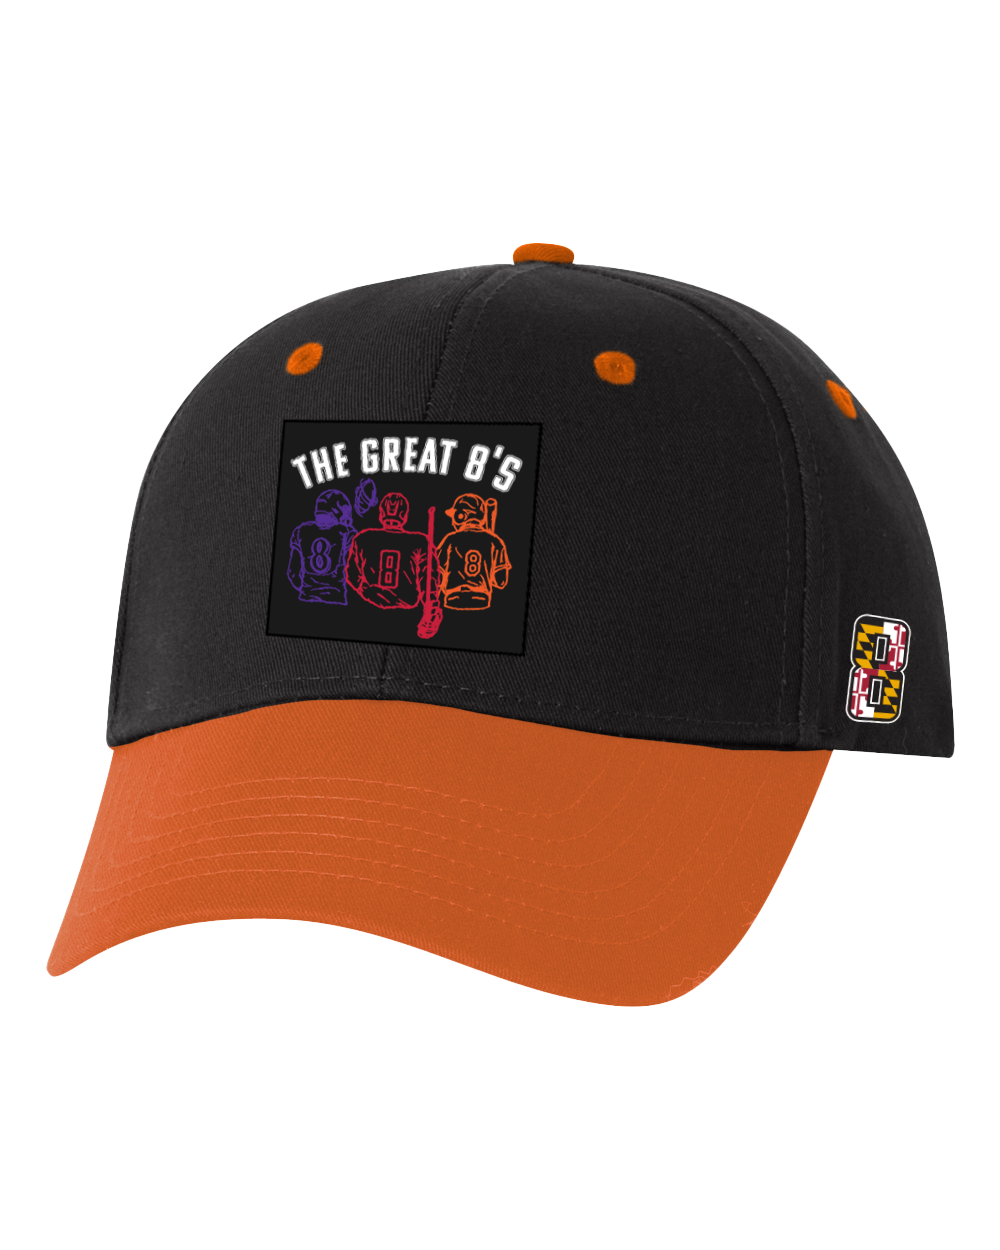 The Great 8's - Maryland Edition (Black) / Baseball Hat - Route One Apparel